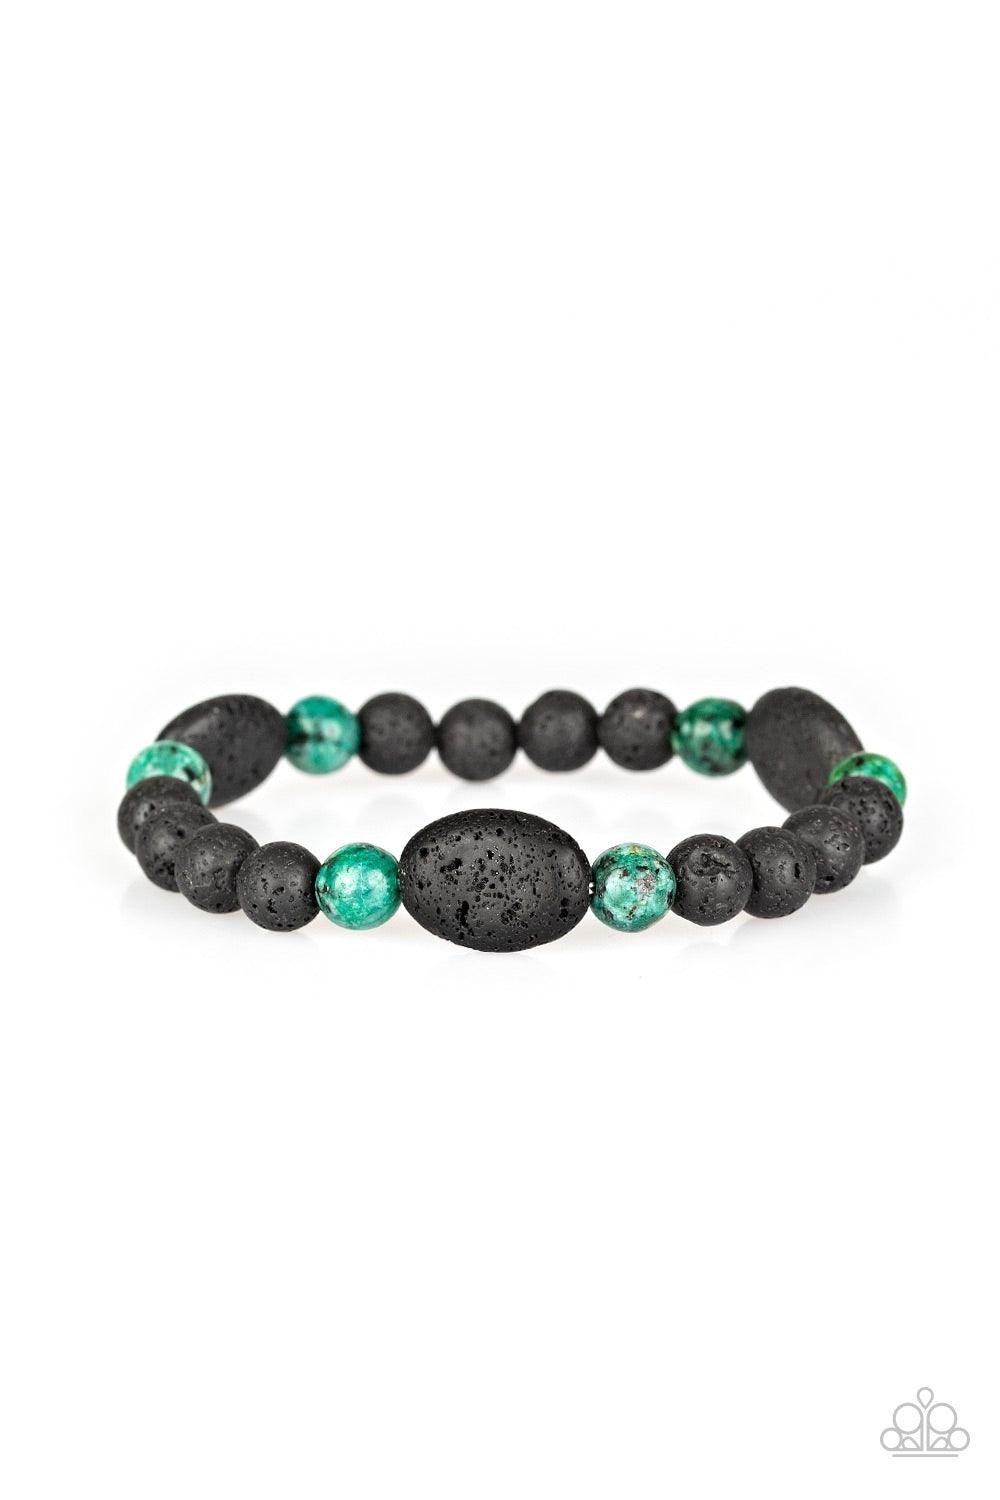 A Hundred And Zen Percent - Green - Beautifully Blinged